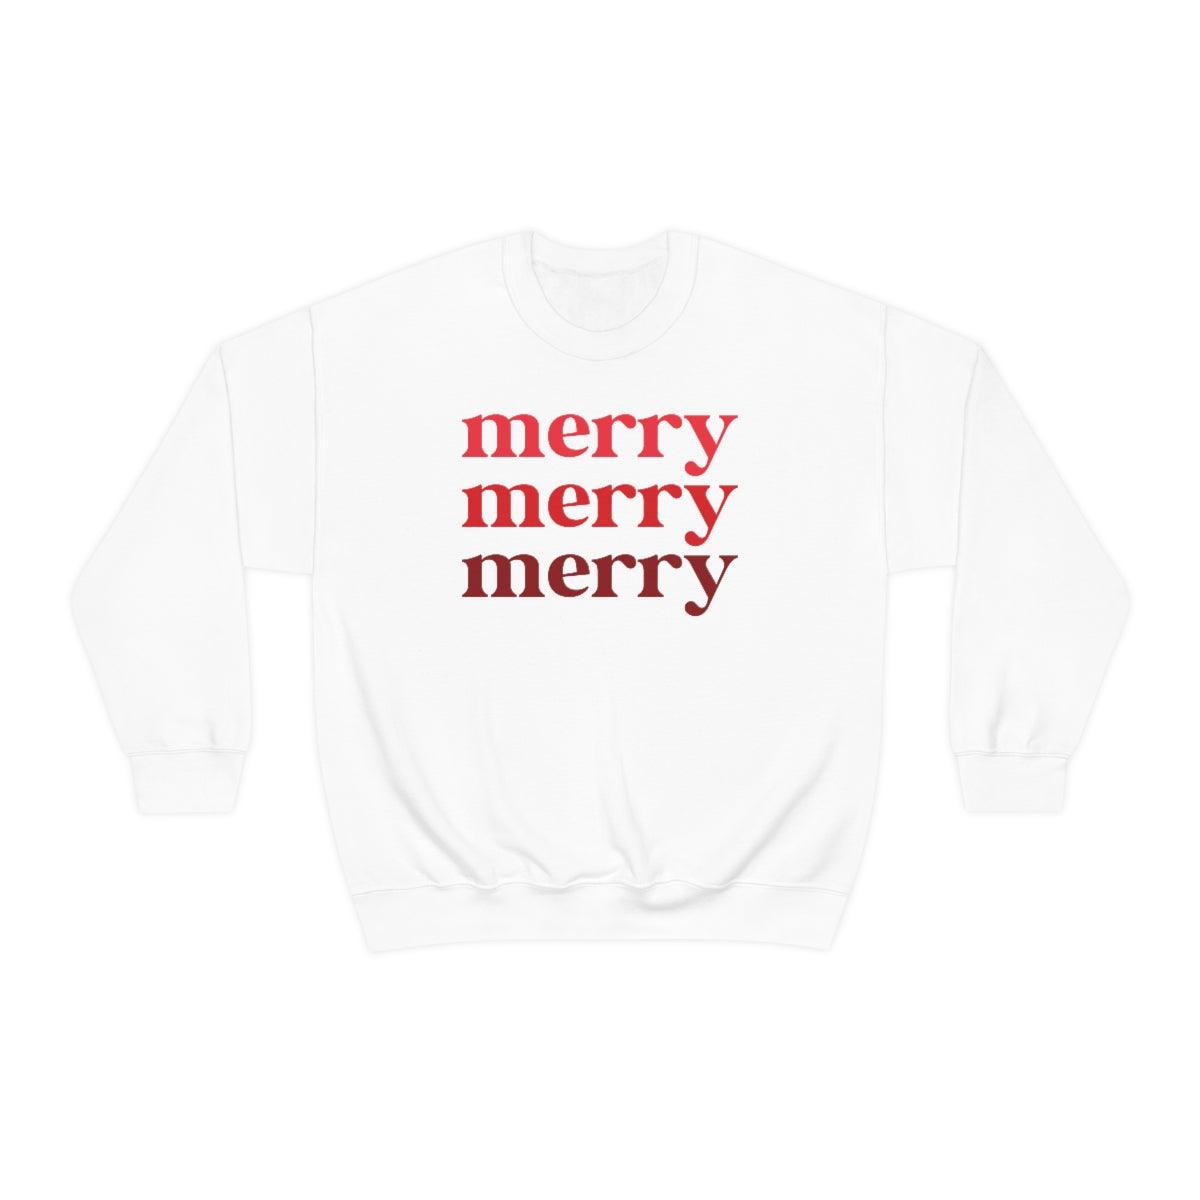 Merry Merry Merry Christmas Crewneck Sweater - Crystal Rose Design Co.